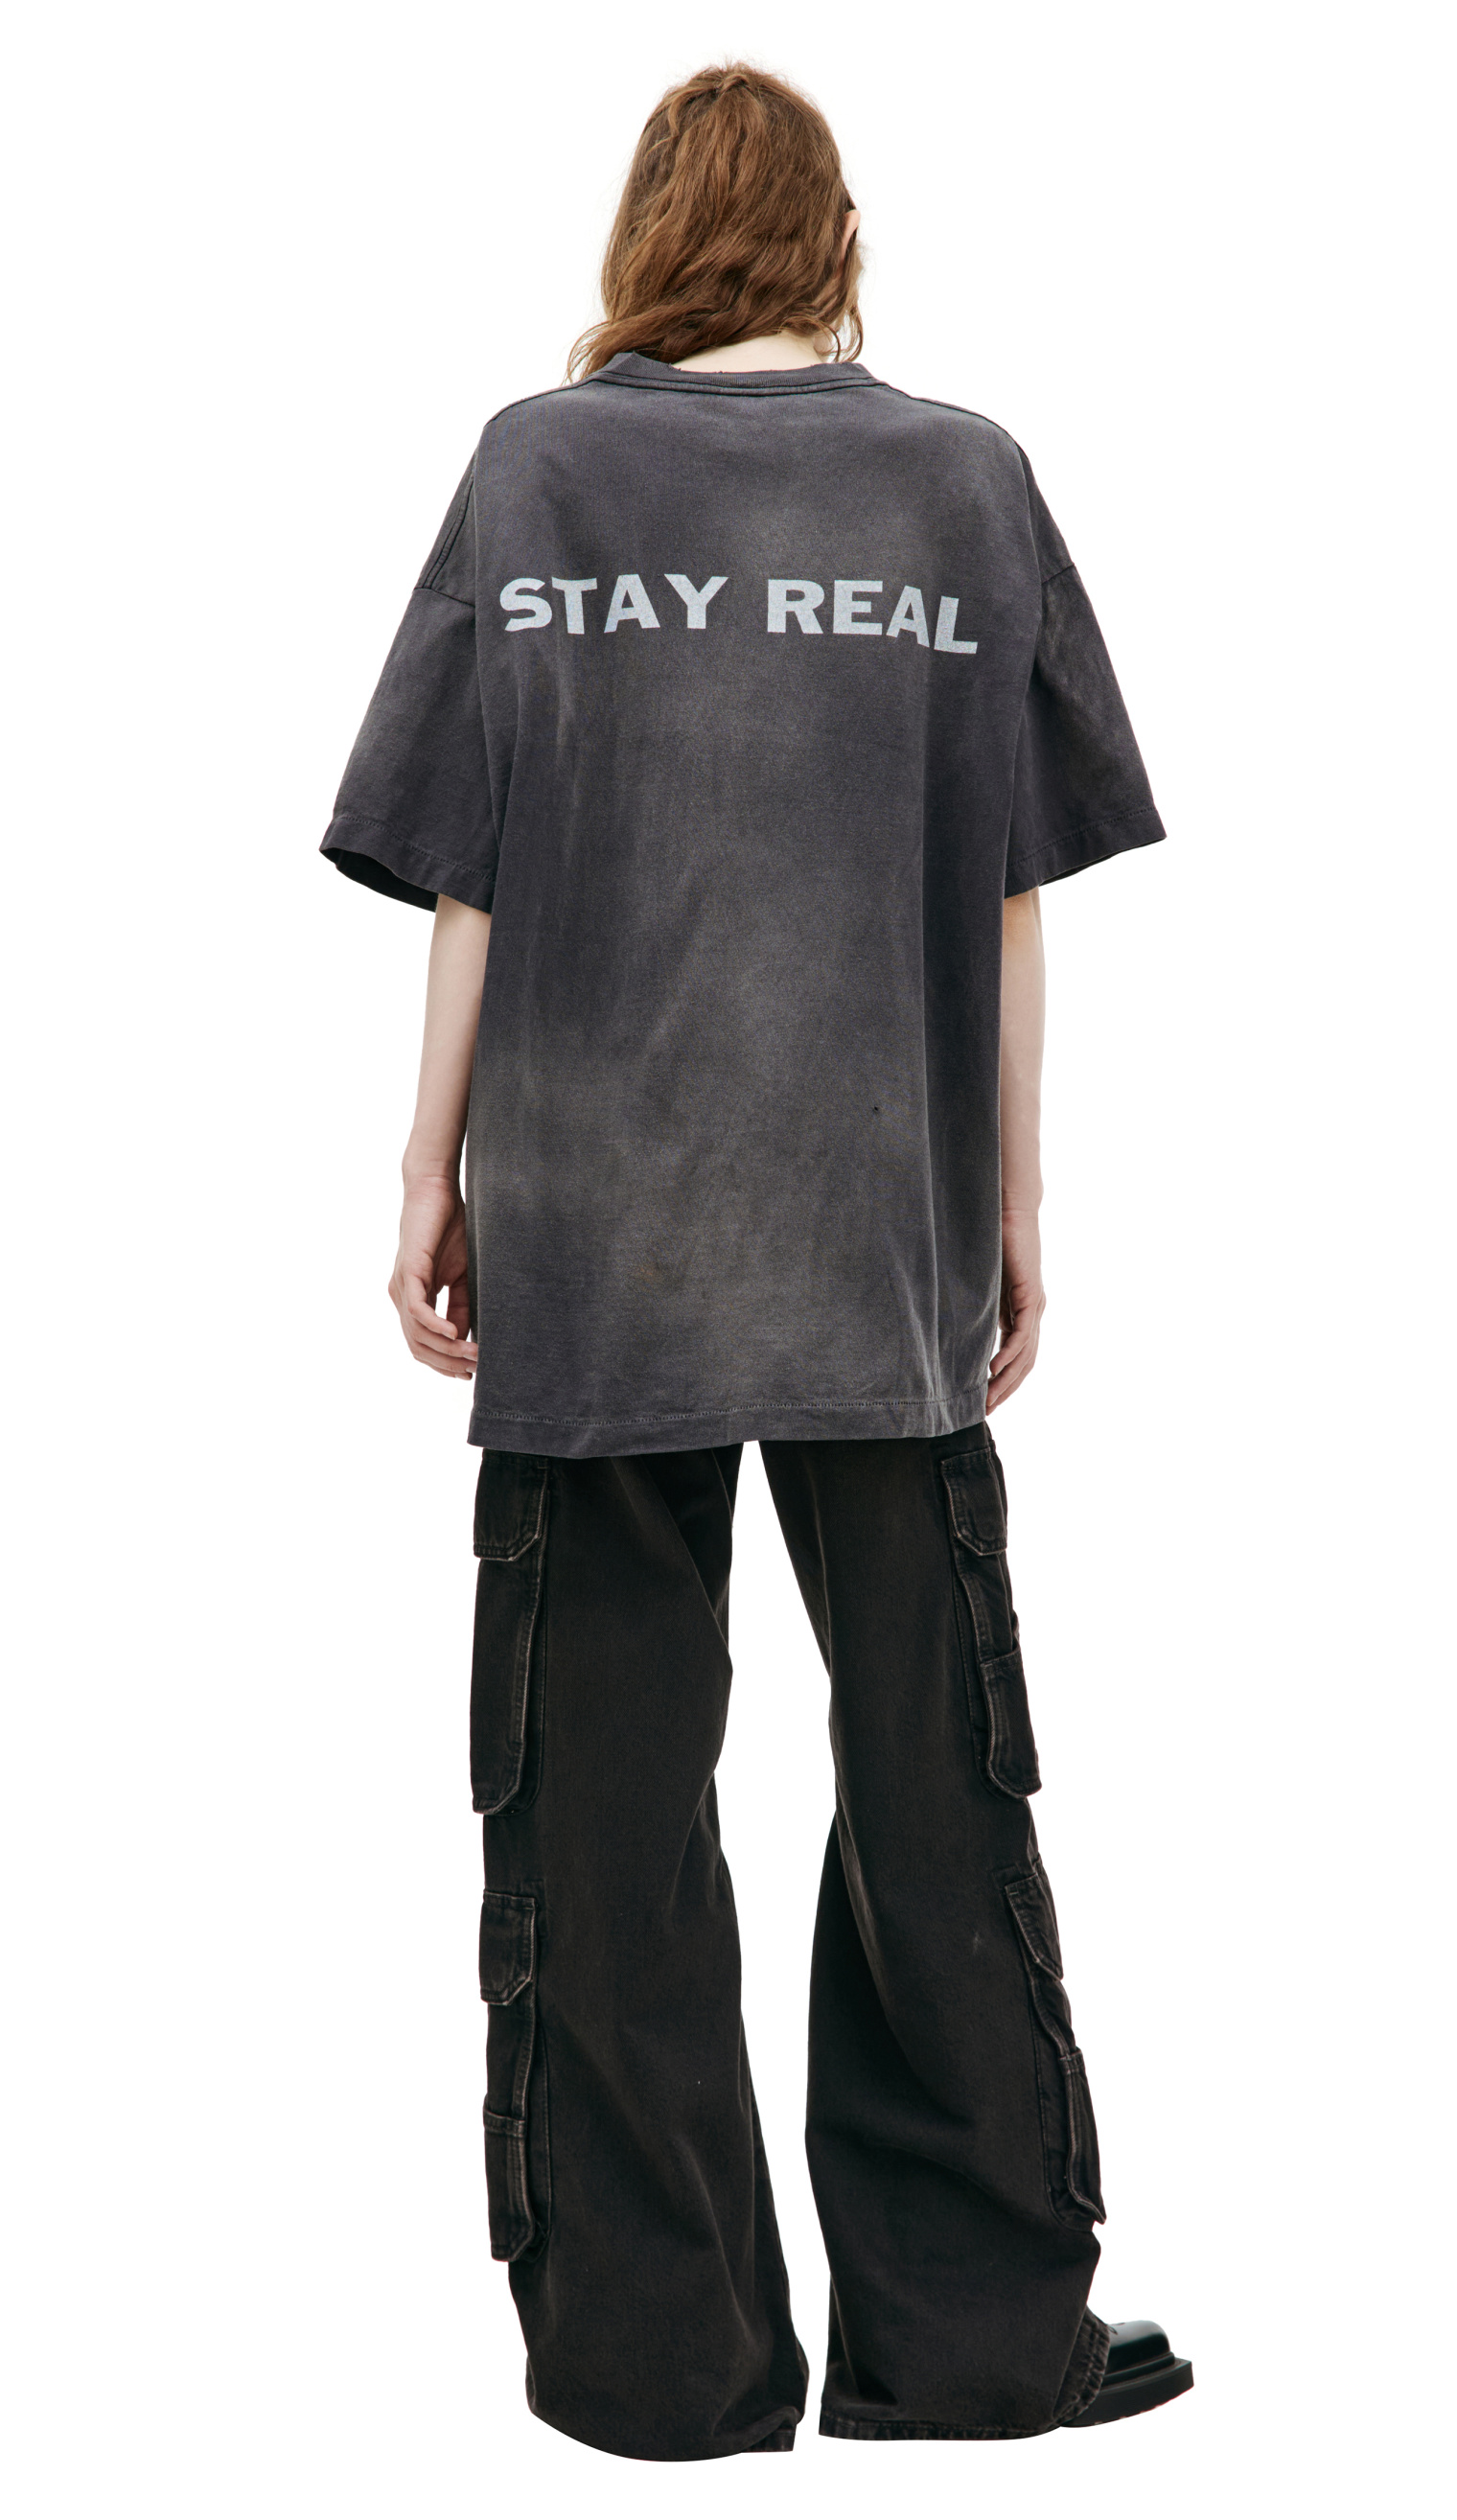 Saint Mxxxxxx STAY REAL printed t-shirt